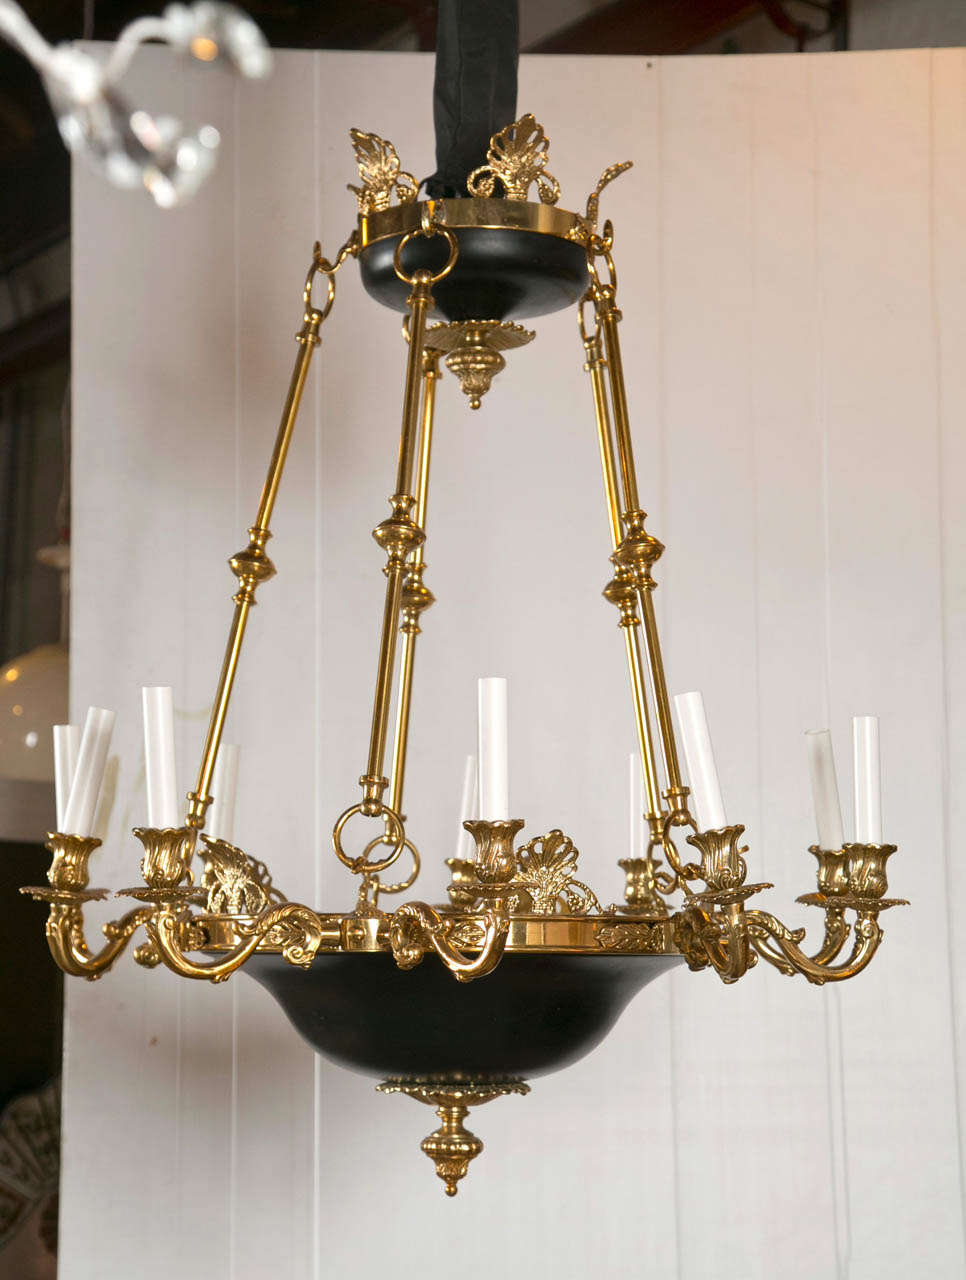 Beautiful Empire-style 10-light chandelier, 3rd quarter of 20th century, brass chains and arms, tole painted.